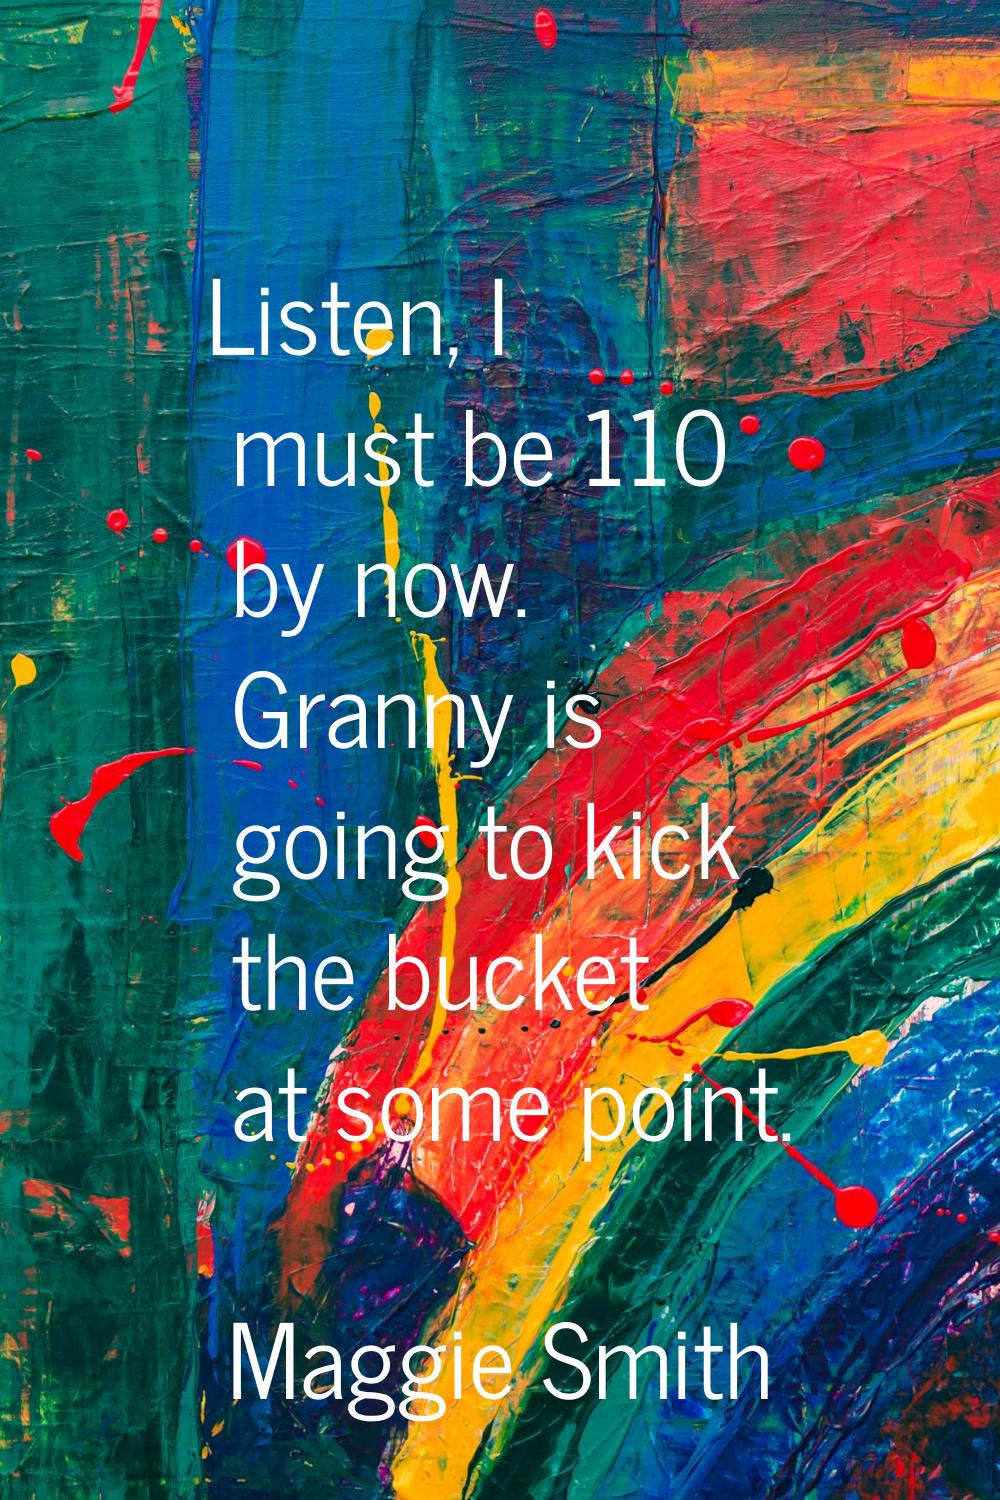 Listen, I must be 110 by now. Granny is going to kick the bucket at some point.